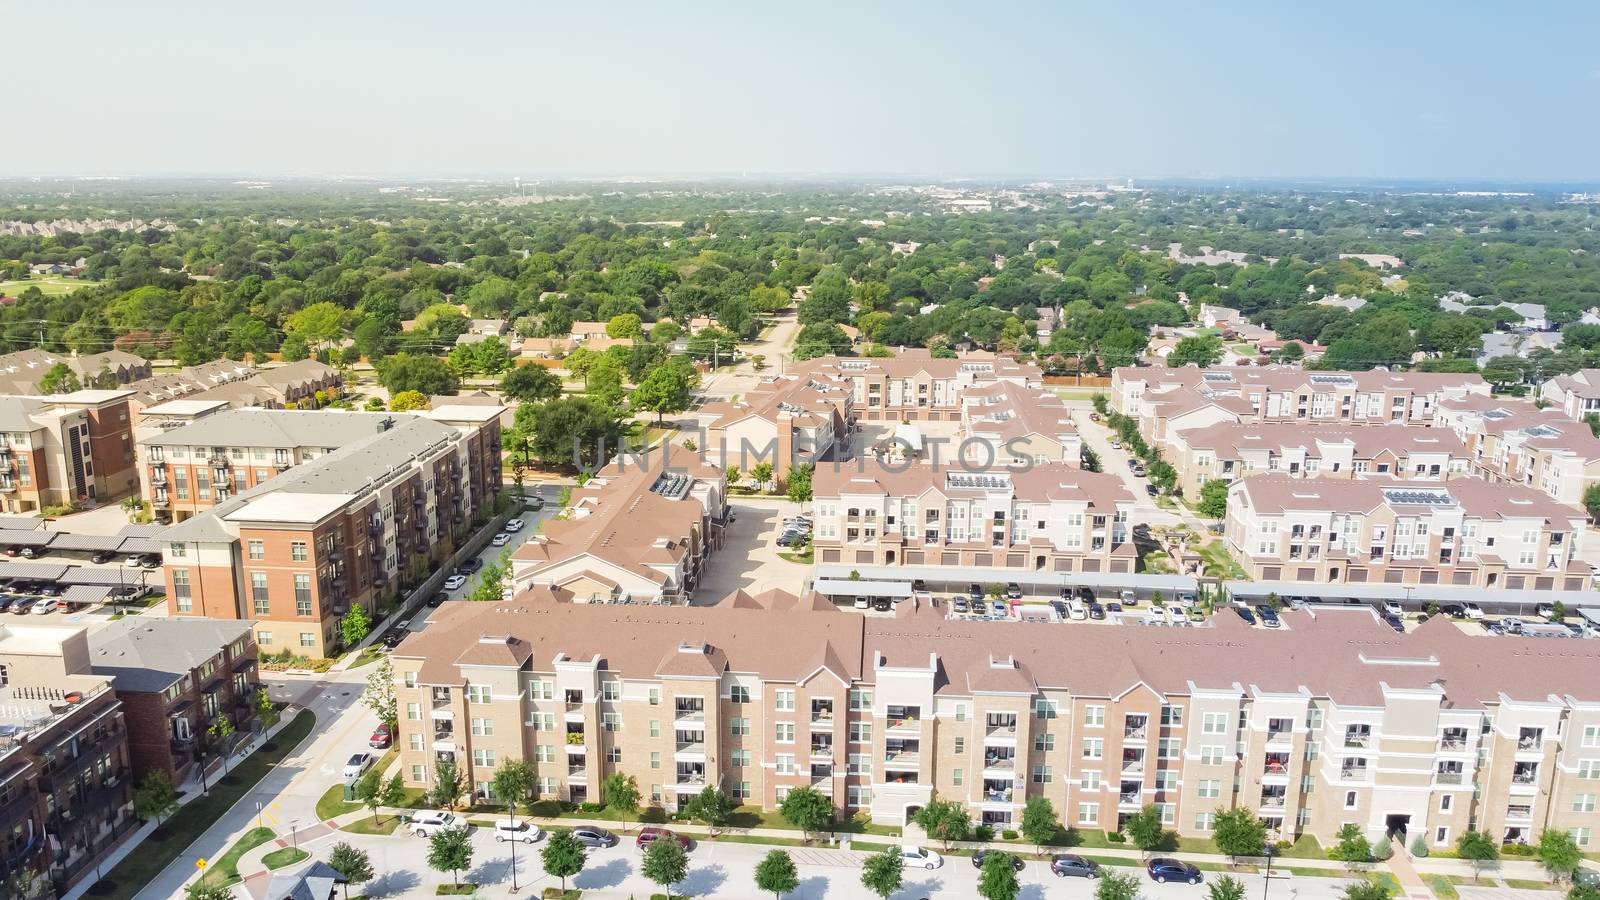 Flyover brand new multistory apartment complex with covered parking lots and suburban residential area in background. Master-planned community and census-designated sprawl in Flower Mound, TX